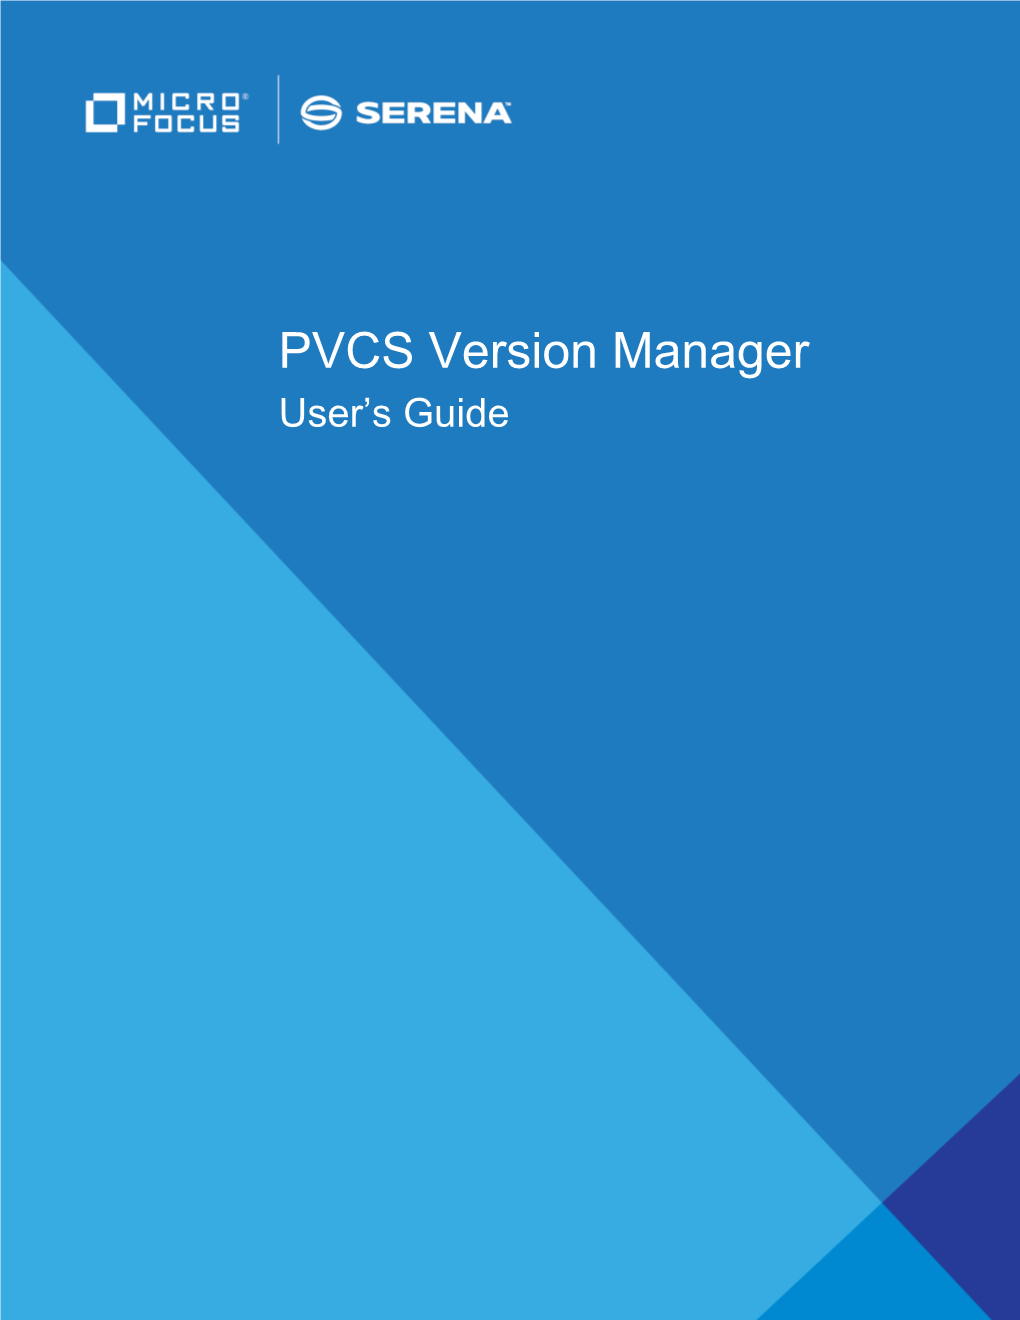 PVCS Version Manager User's Guide